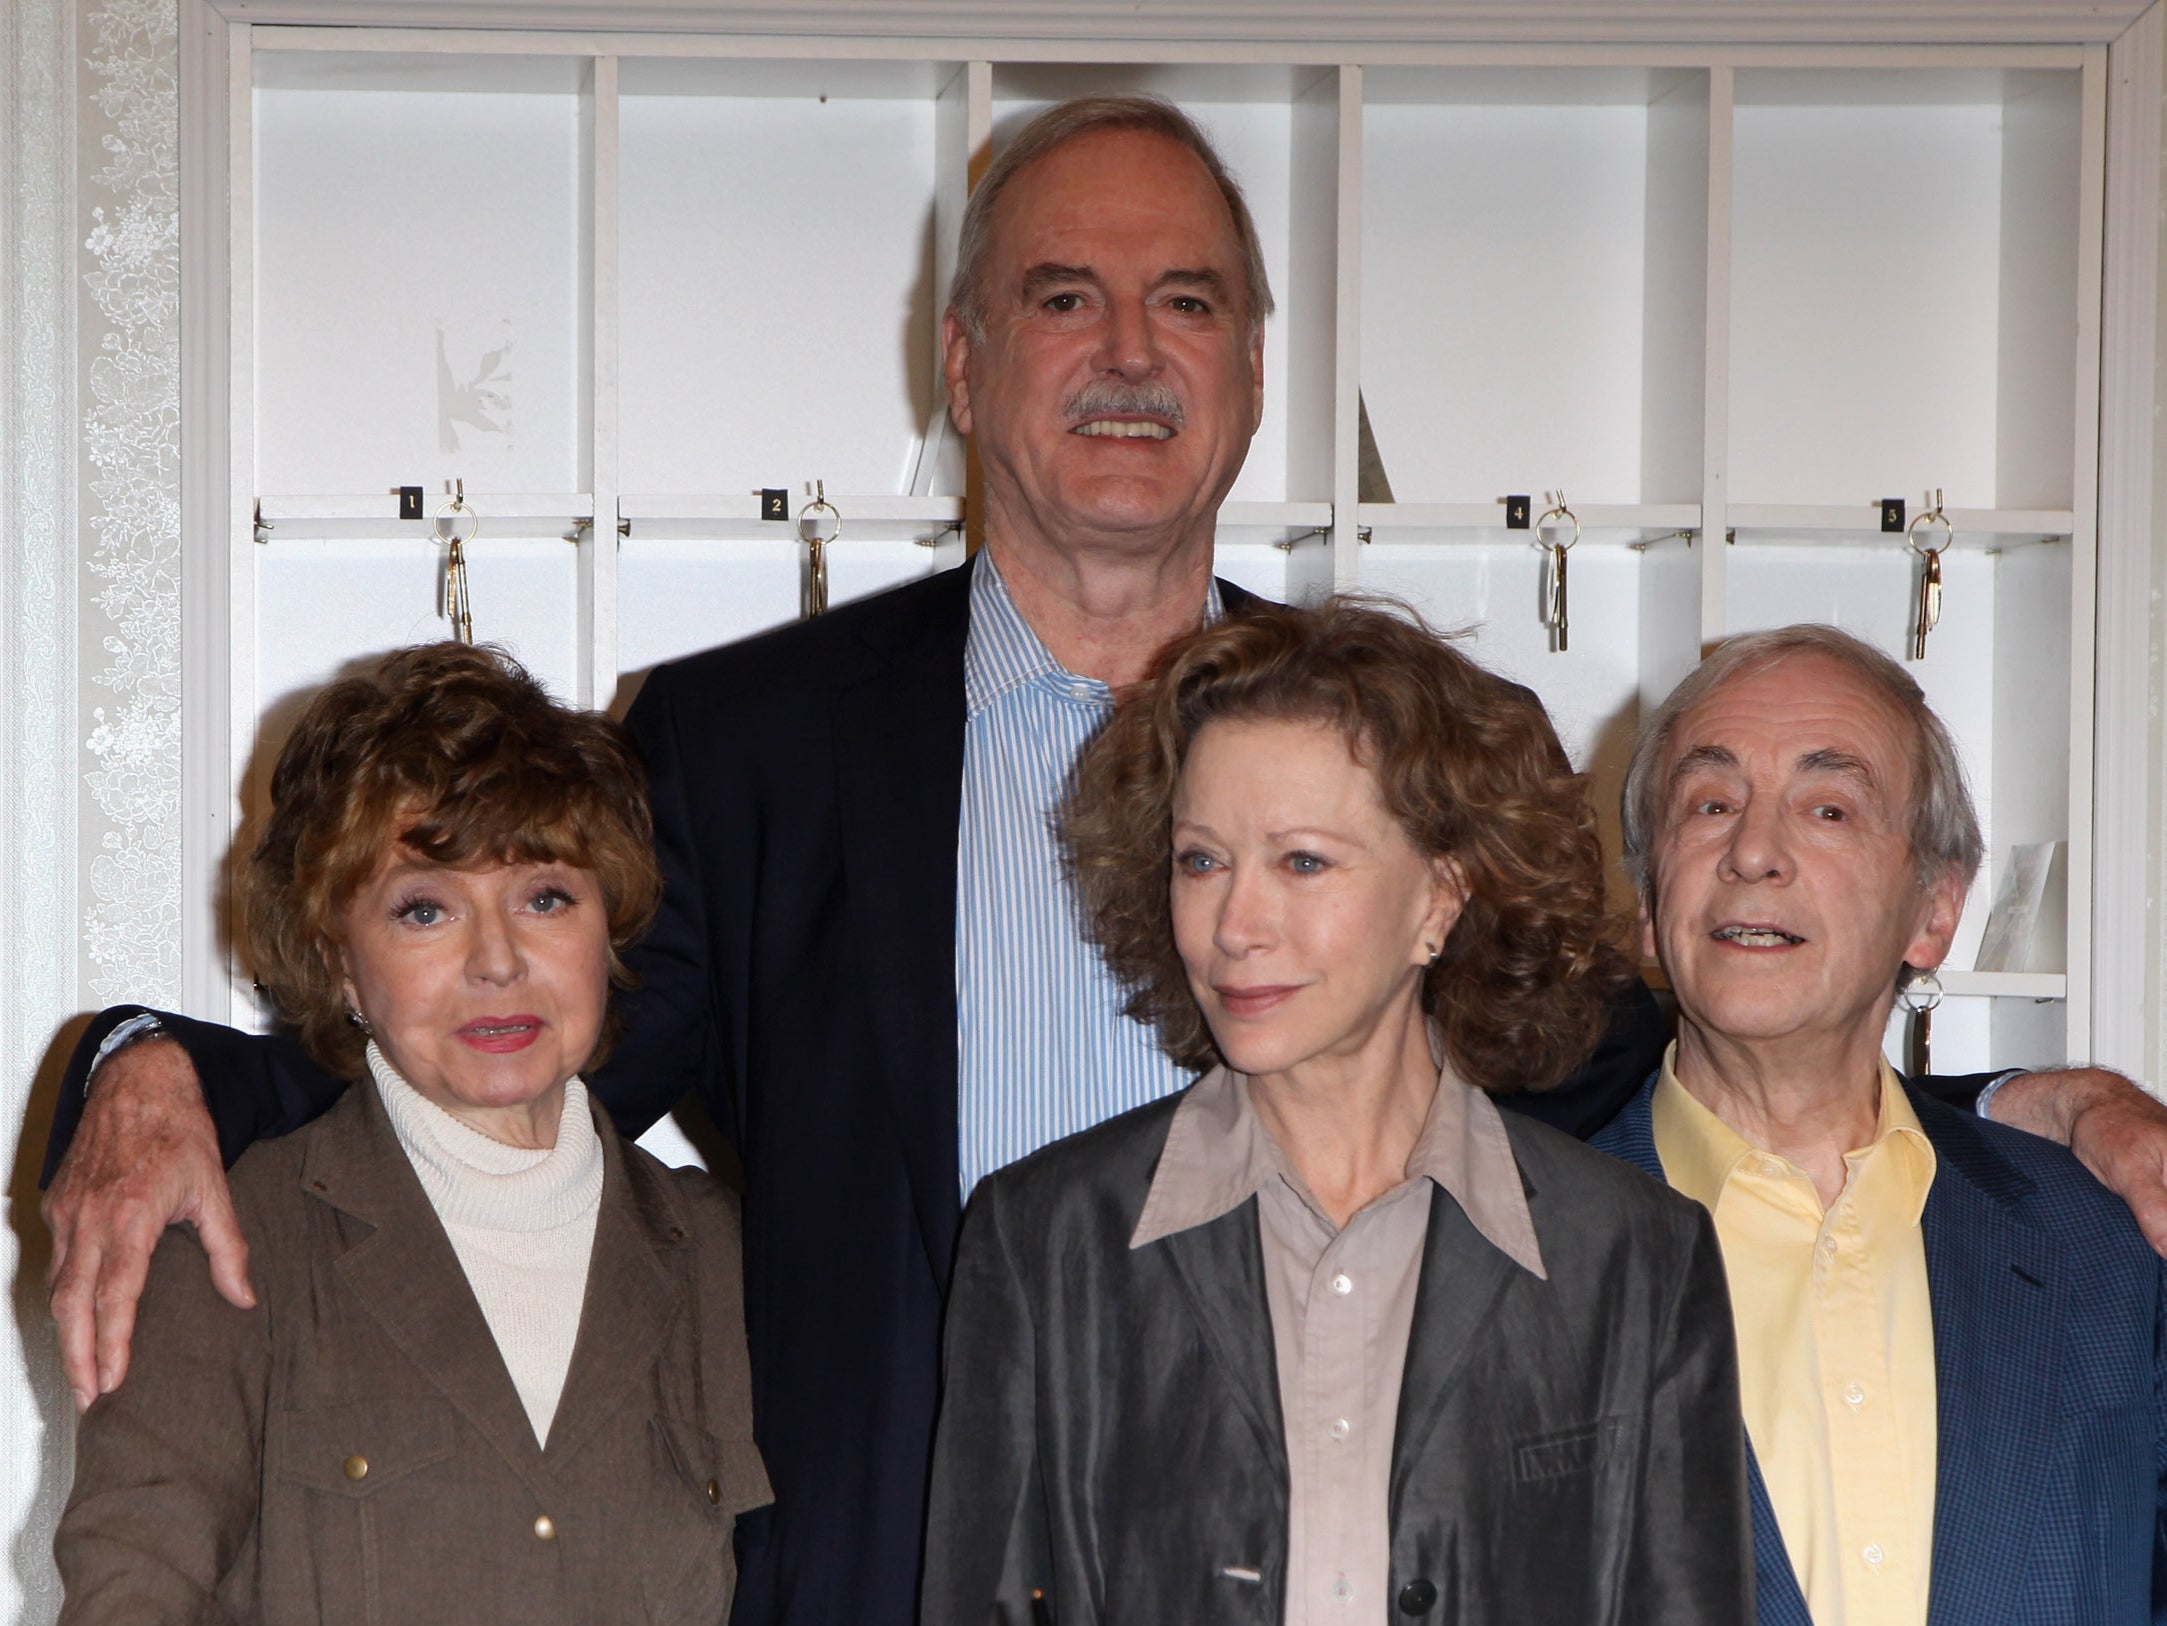 The original cast of ‘Fawlty Towers’: Prunella Scales, John Cleese, Connie Booth and Andrew Sachs, pictured in 2009